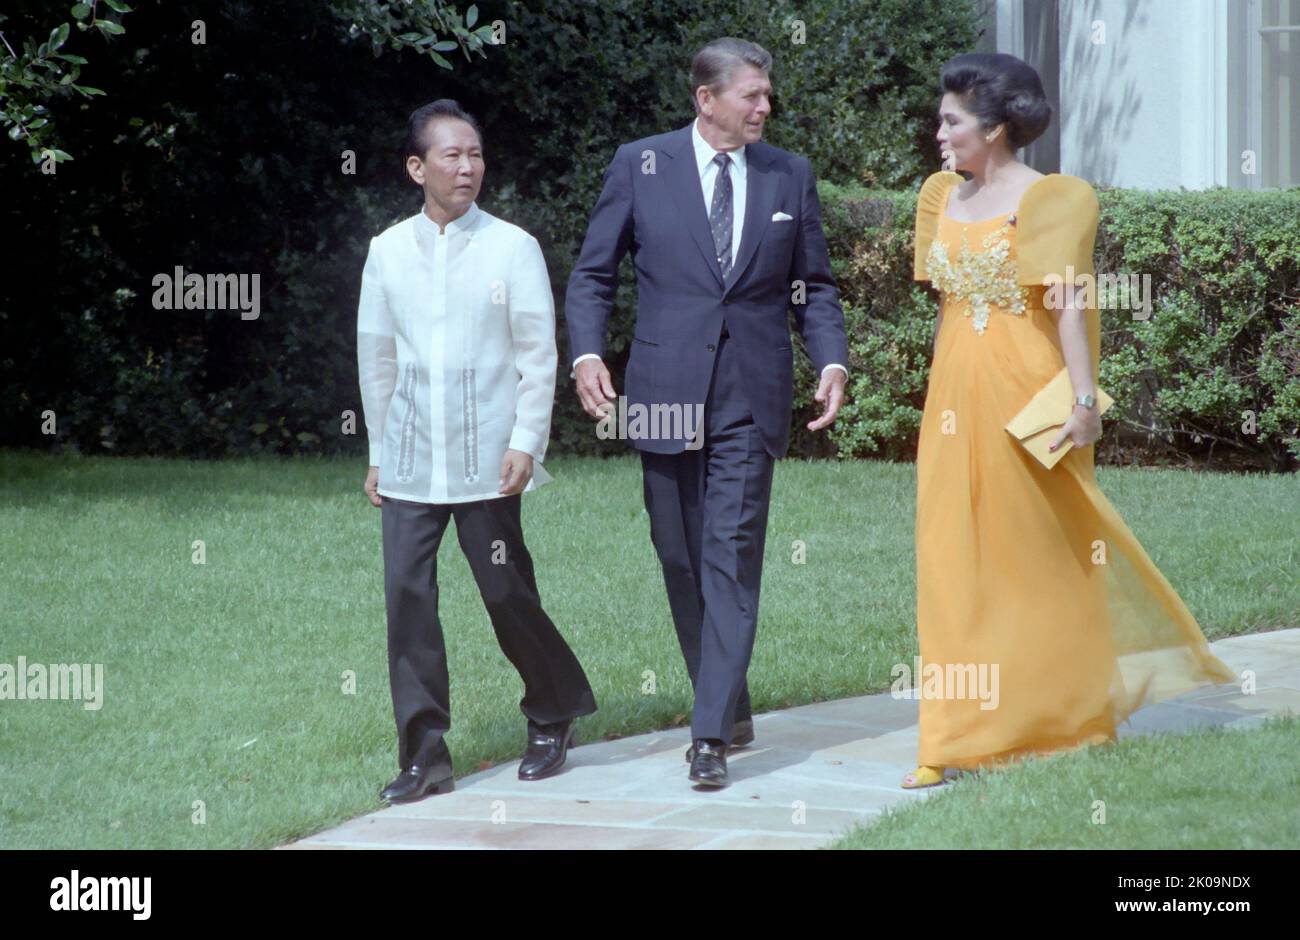 Phillipines President Ferdinand and Imelda Marcos at the White House with US President Ronald Reagan in 1982. Ferdinand Emmanuel Edralin Marcos Sr. (September 11, 1917 - September 28, 1989) was a Filipino politician and lawyer who was the 10th president of the Philippines from 1965 to 1986. Imelda Romualdez Marcos (born July 2, 1929) is a Filipina politician and convicted criminal who was First Lady of the Philippines for 20 years. Ronald Wilson Reagan (February 6, 1911 - June 5, 2004) was an American politician who served as the 40th president of the United States from 1981 to 1989. A member Stock Photo